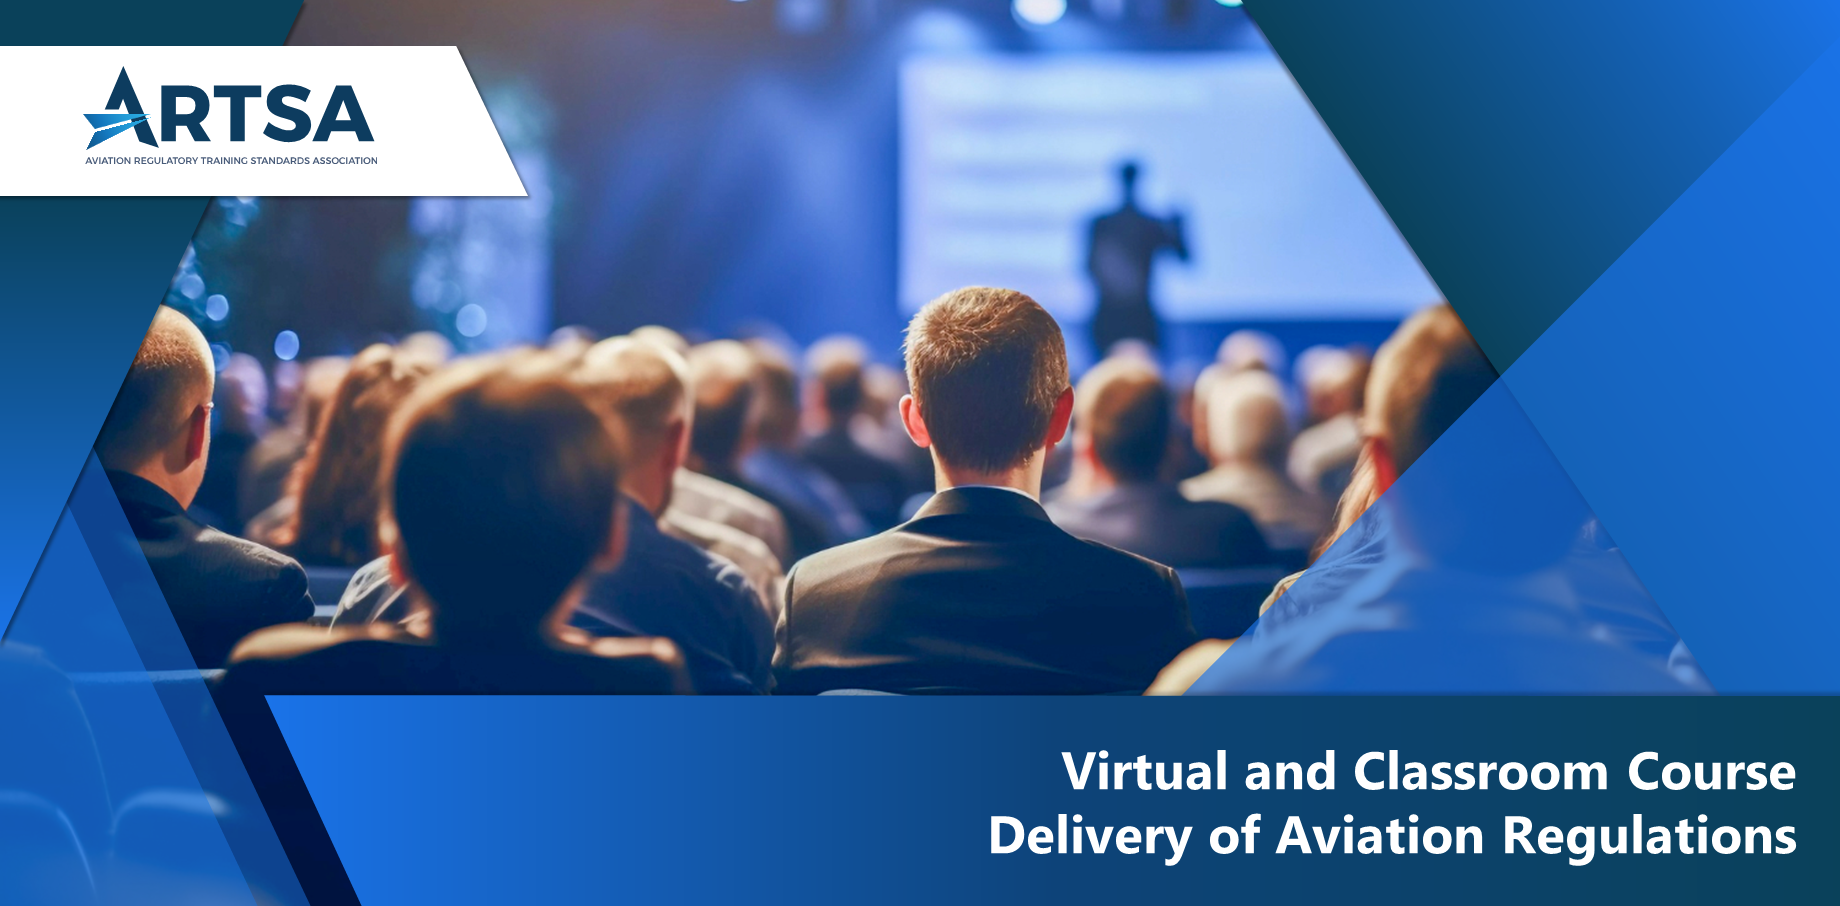 Aviation Regulatory Training Standards Association (ARTSA) Considers best practices related to the potential for Hybrid Delivery of Aviation Regulatory Training (Classroom – Webinar)